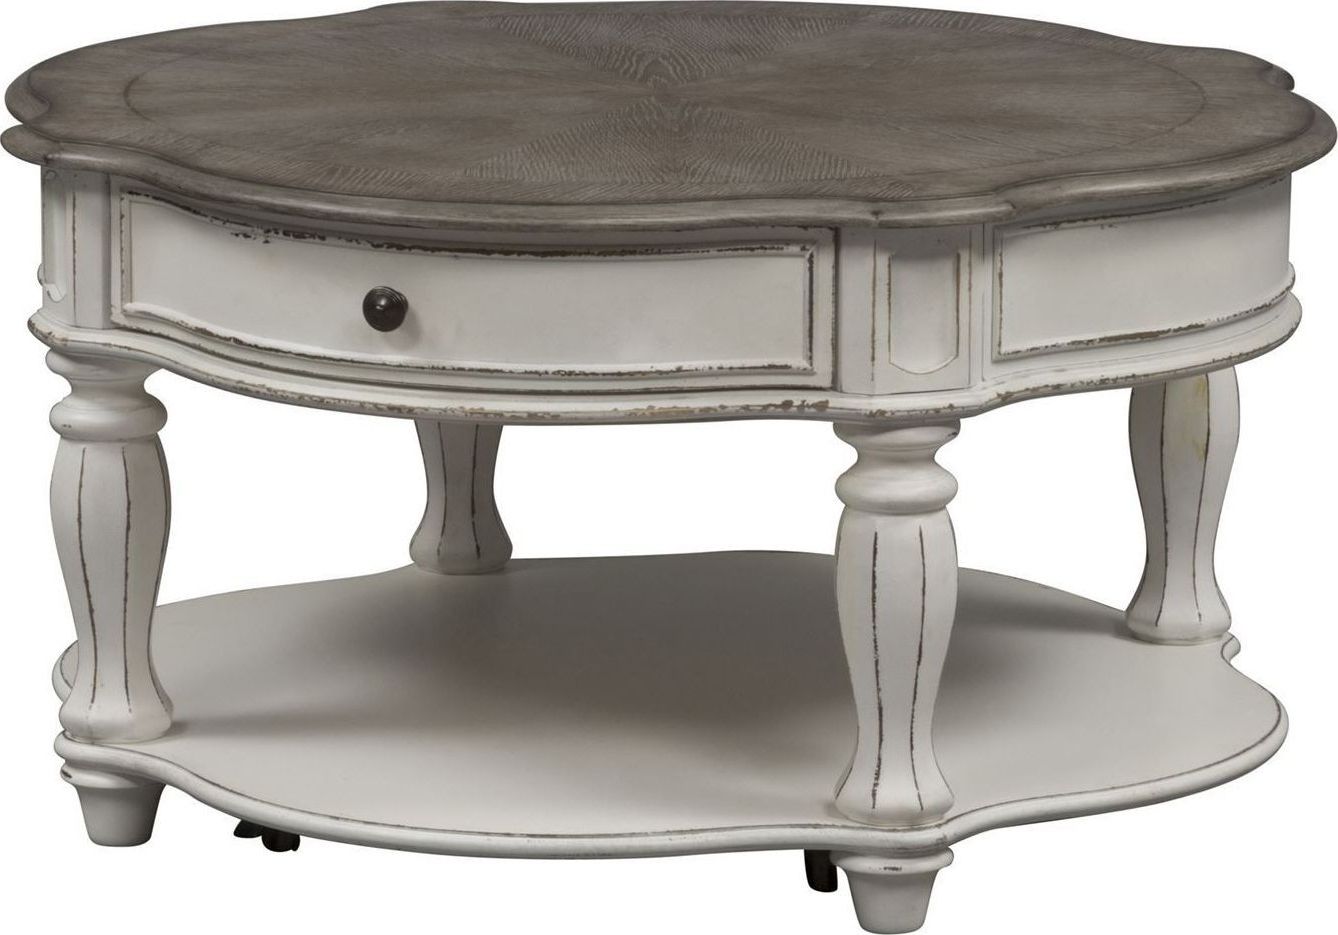 Magnolia Manor Antique White Round Cocktail Table From Inside Trendy Round Cocktail Tables (View 12 of 20)